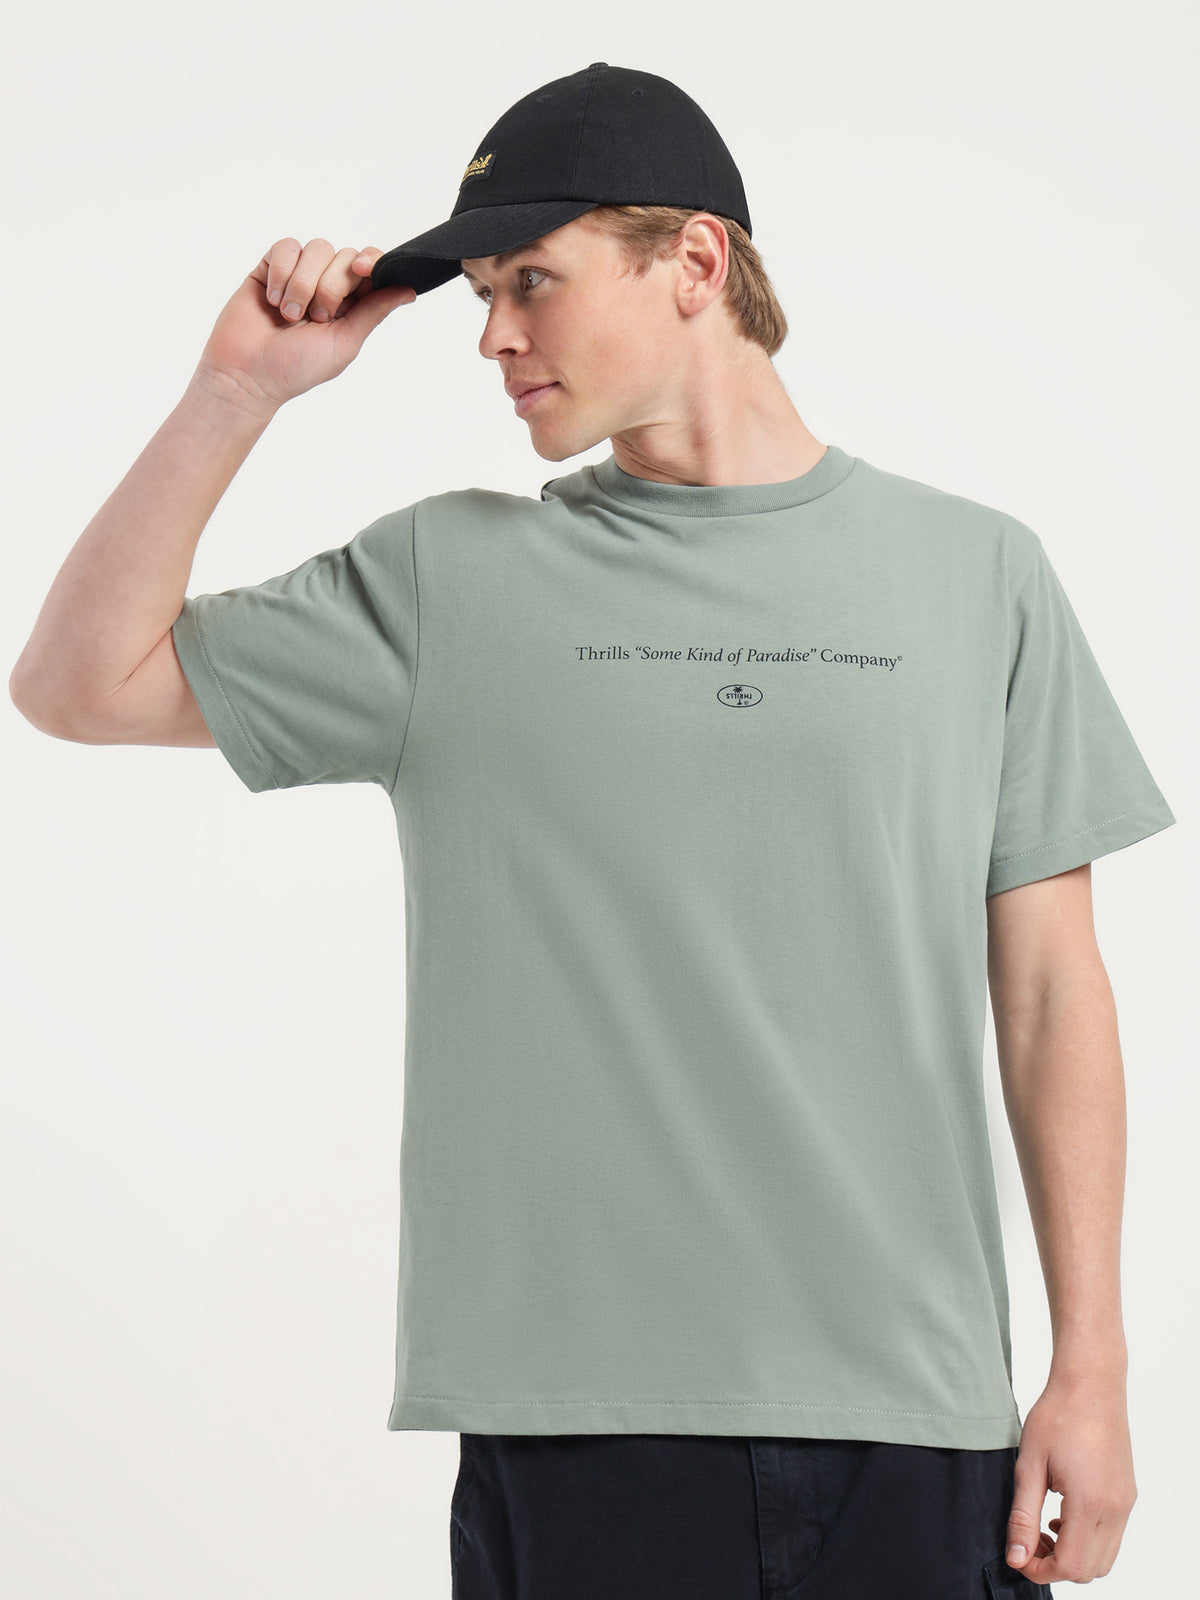 Some Kind of Paradise Merch Fit T-Shirt in Sea Glass